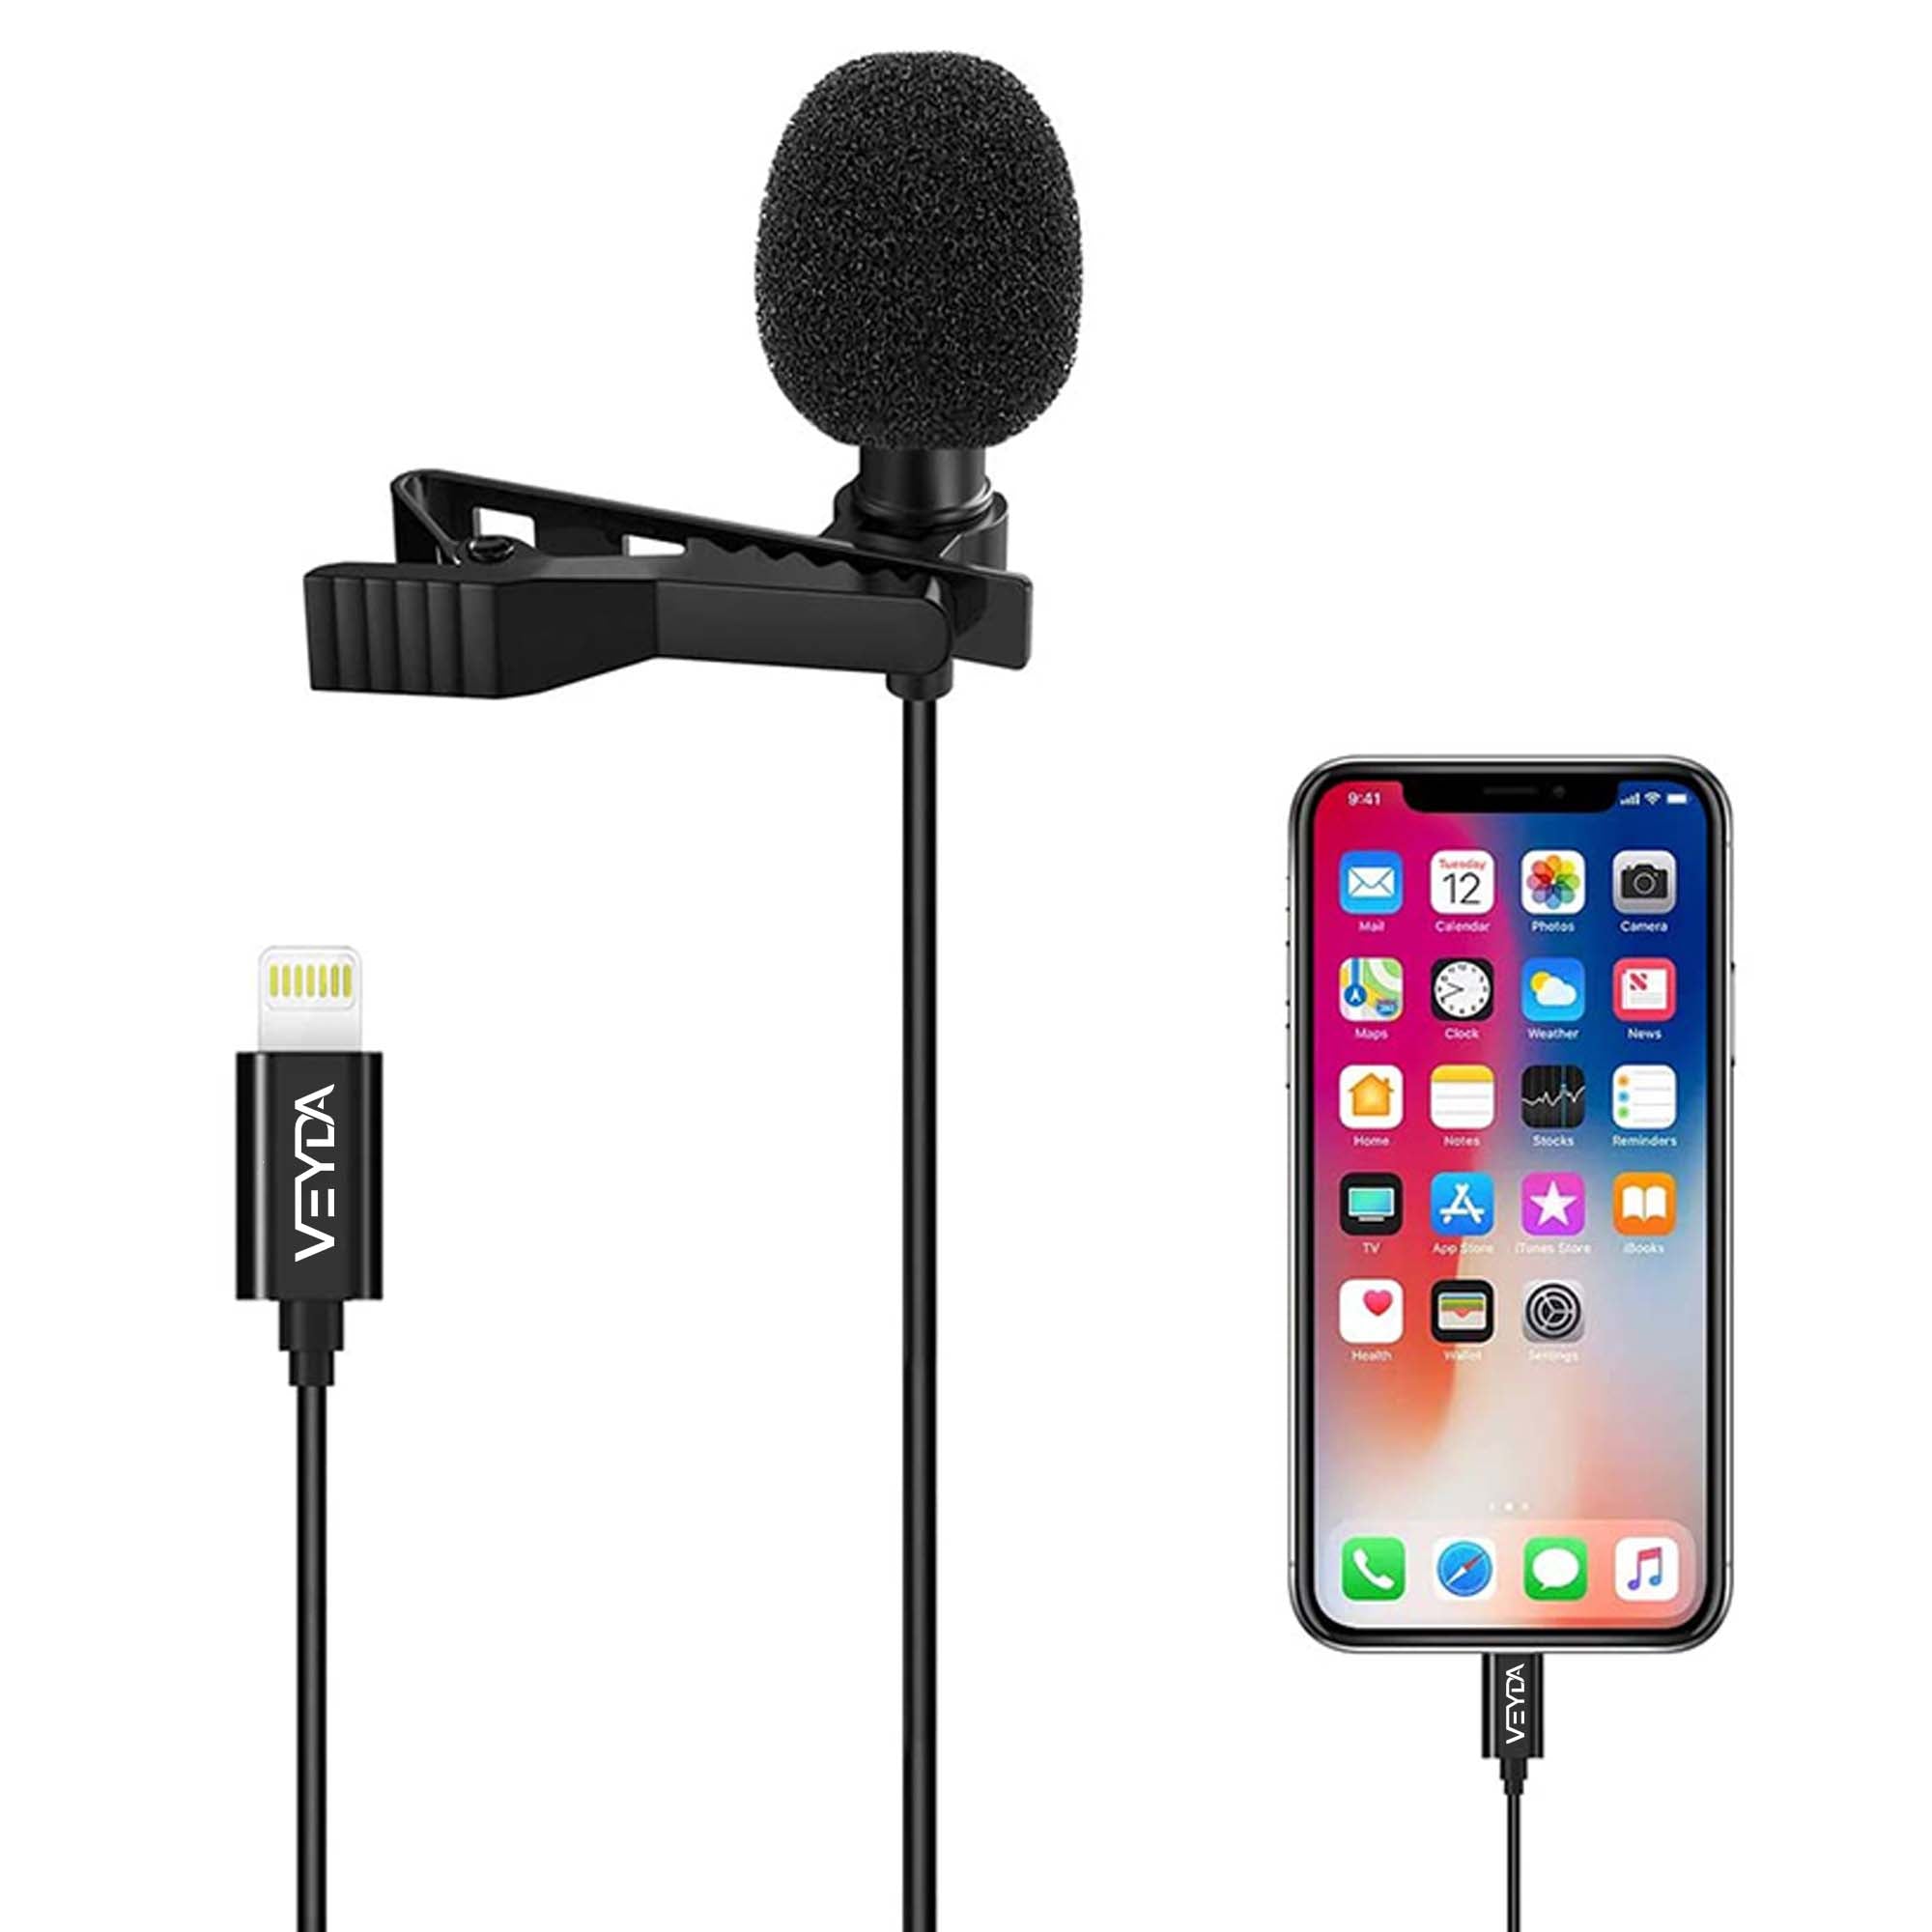 PoP voice Microphone Professional for iPhone Lavalier Lapel Omnidirectional  Microphone for iPad, iPod, Condenser Mic for iPhone Audio & Video